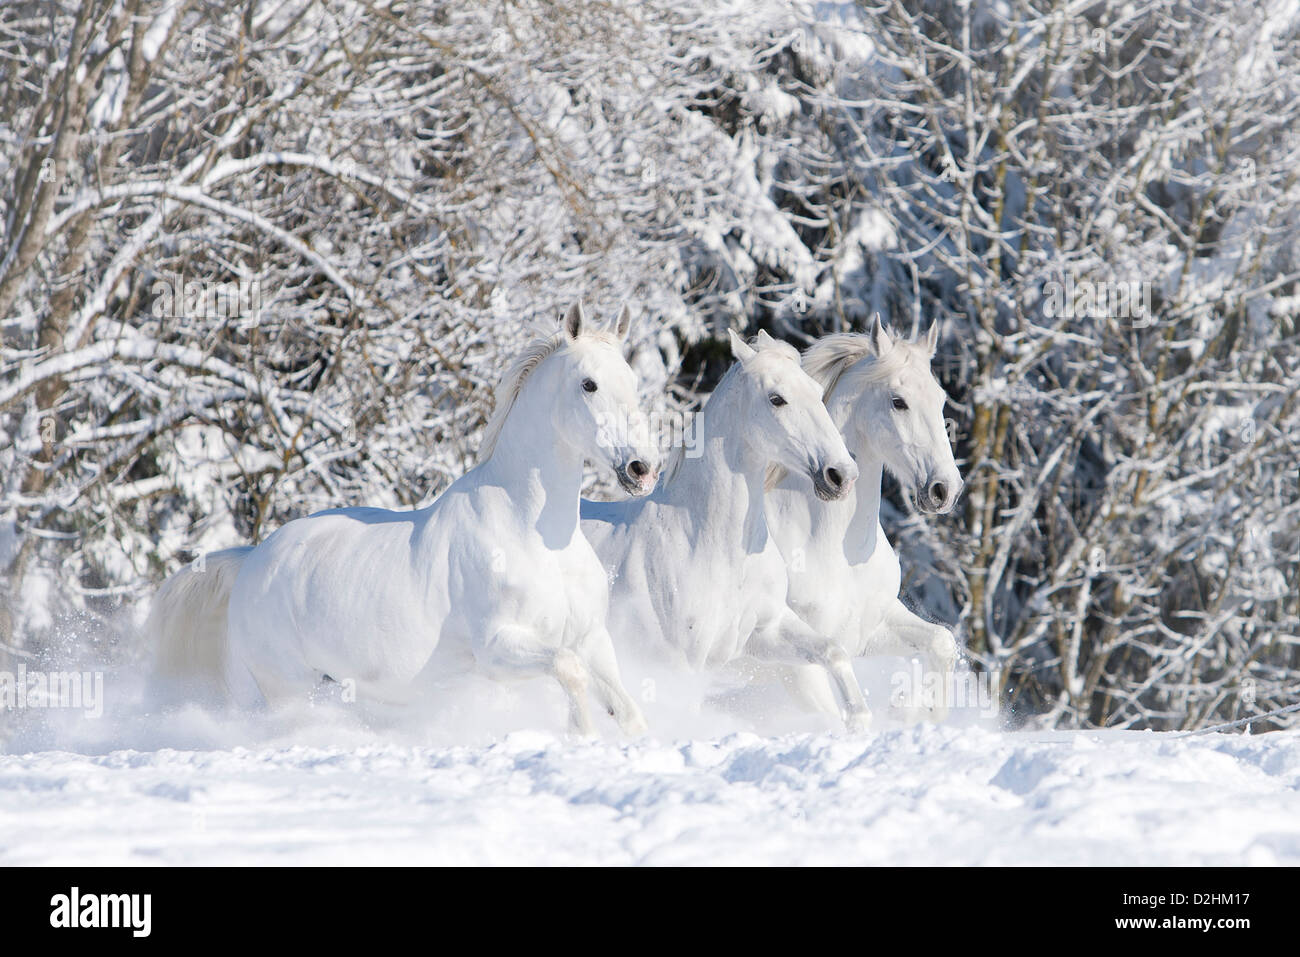 Kladruber. Three gray horses galopping on a snowy meadow Stock Photo